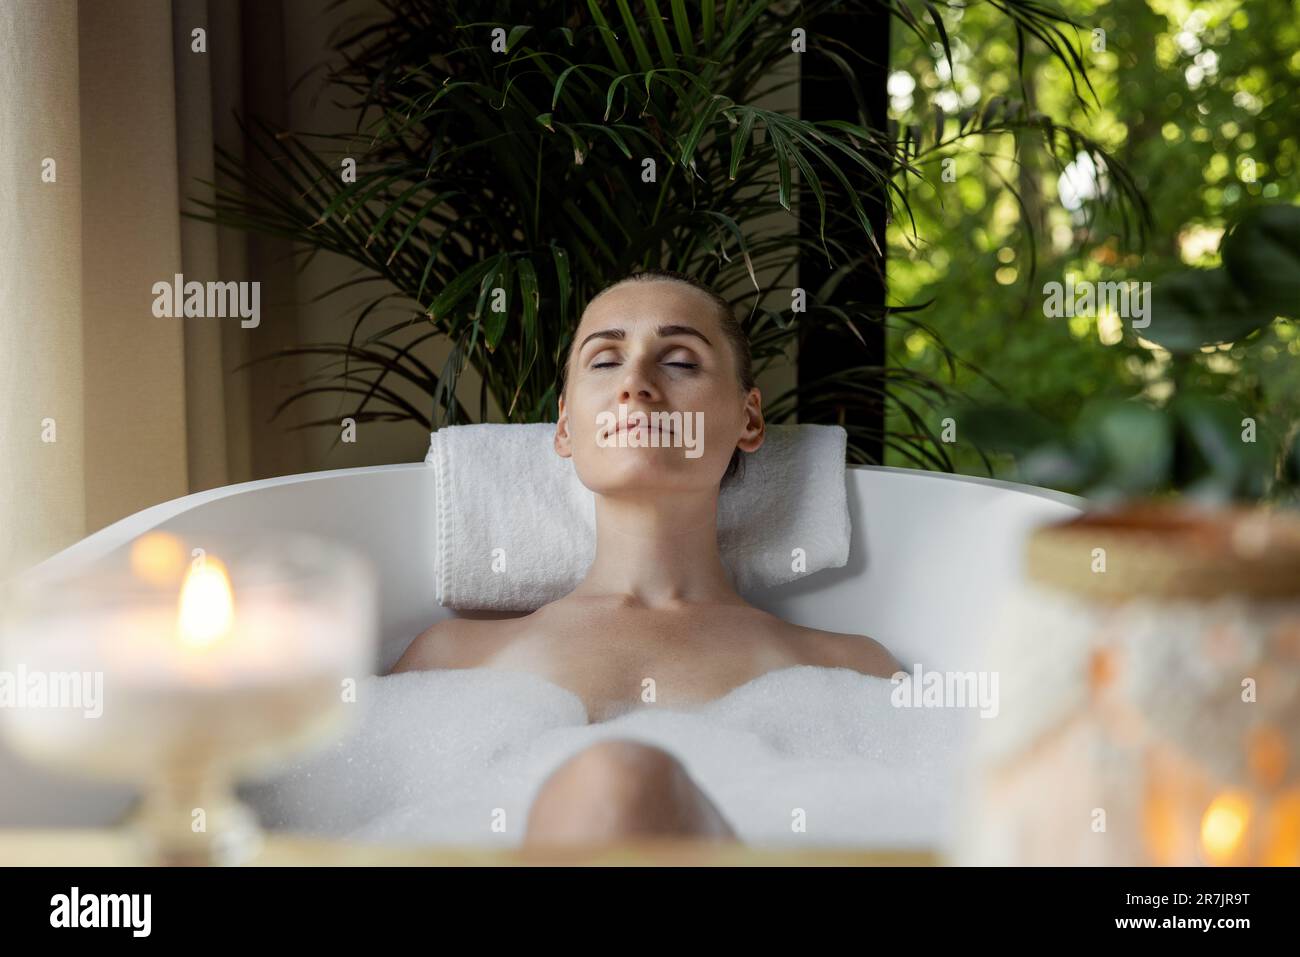 woman enjoying spa bath with foam and scented candles. body care, aromatherapy and mental wellness Stock Photo